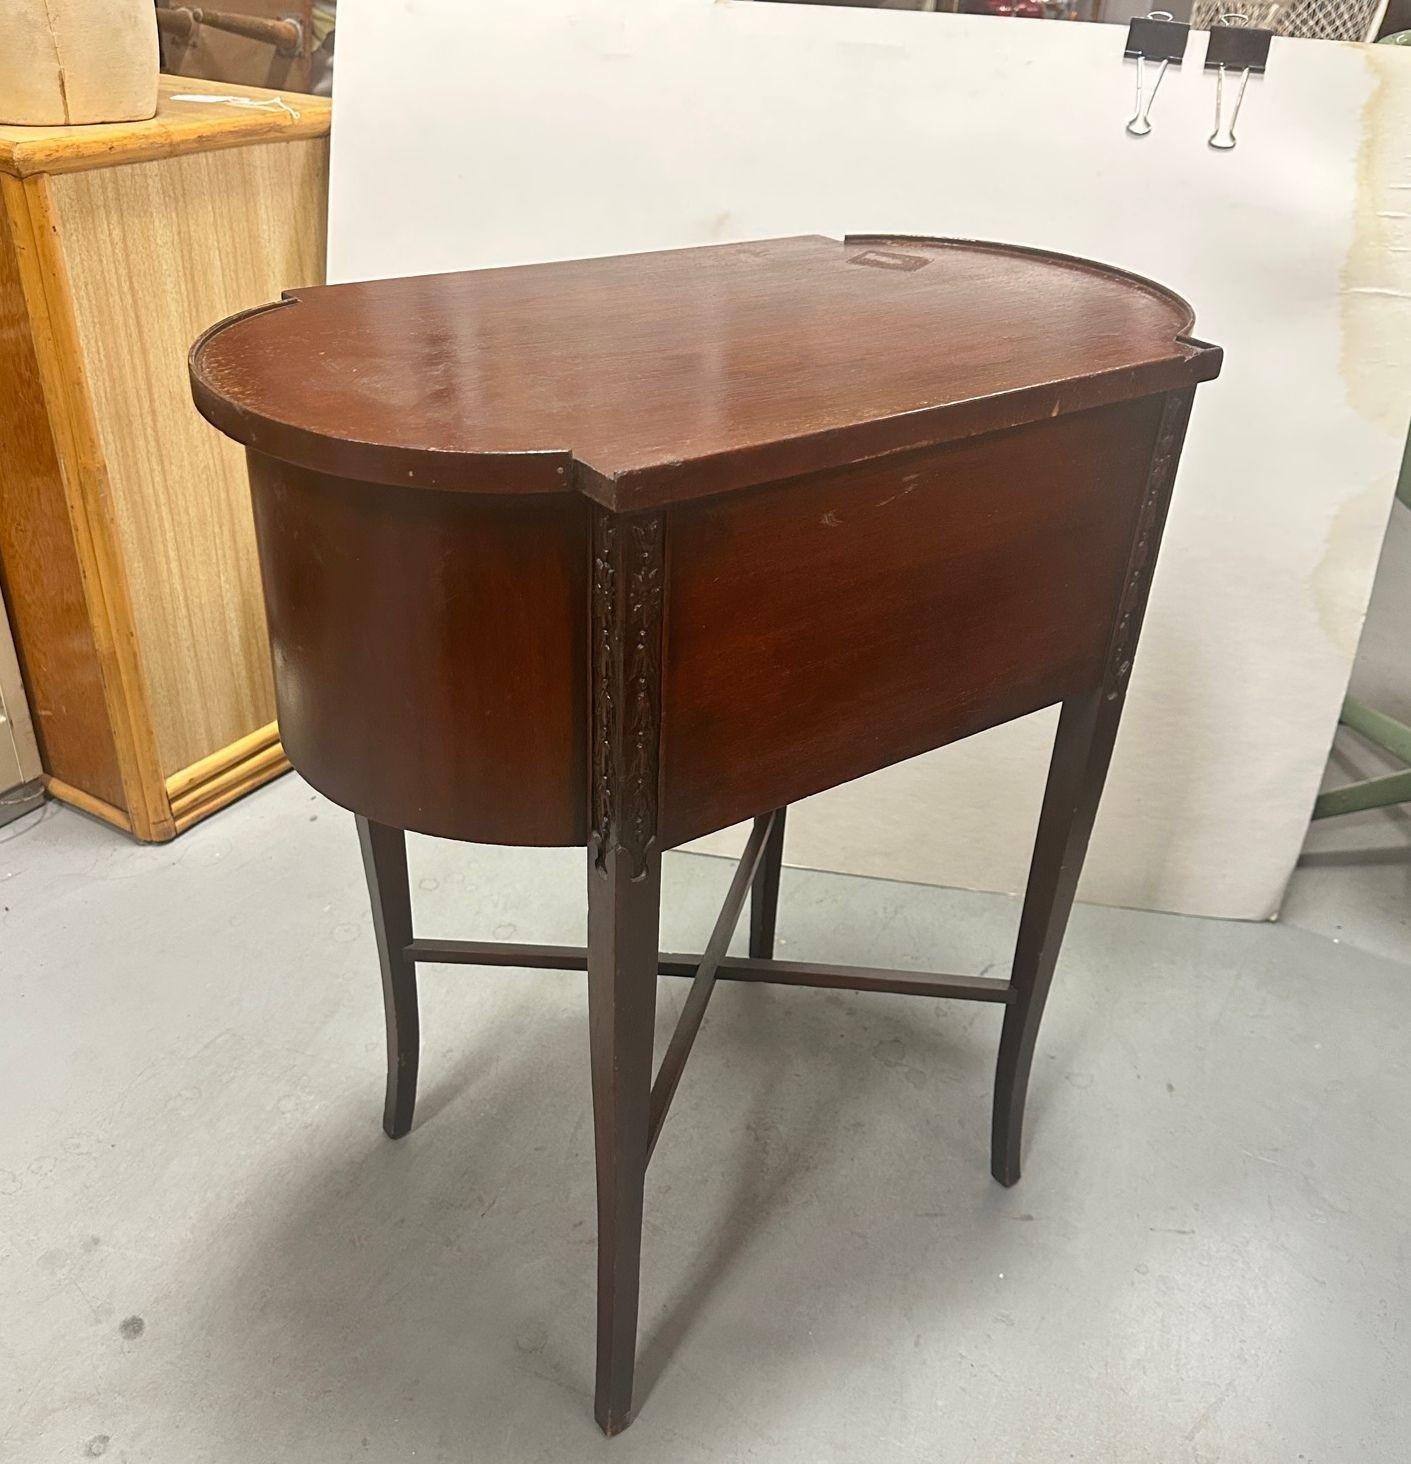 This antique regency end table with a federal-inspired shape is made with dark mahogany and has a unique shape that will complete in any direction. There are two cabinets. There is an ornate motif on the corners of the table. This table does have